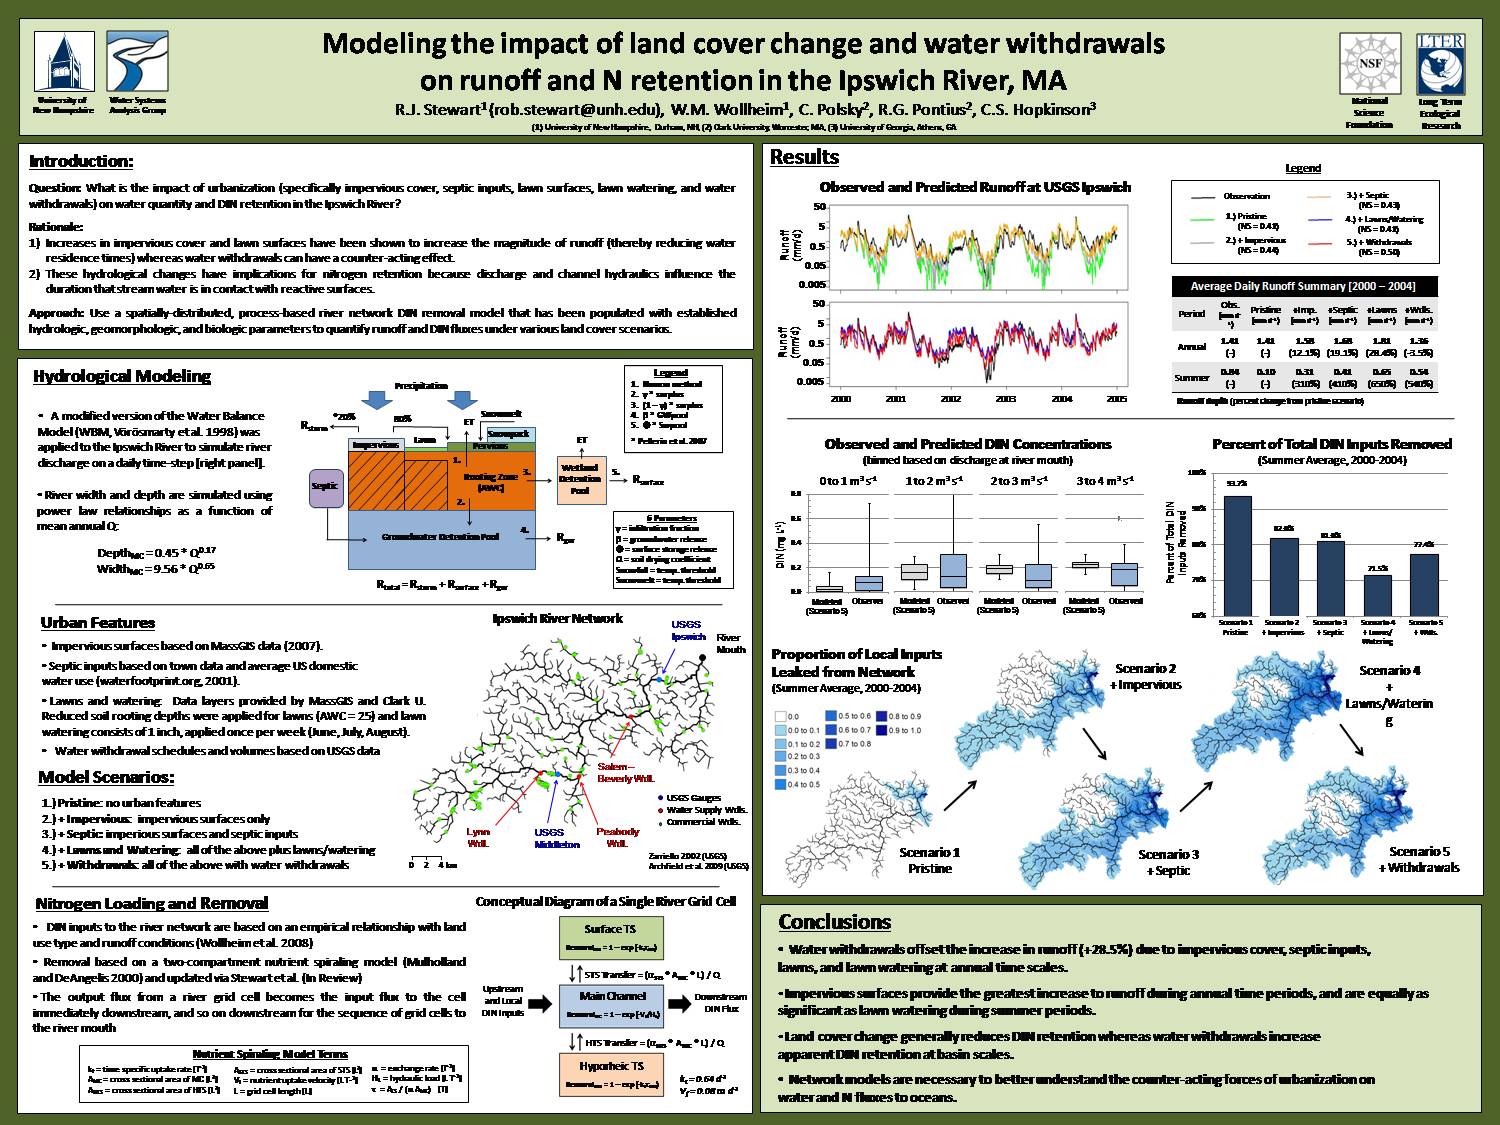 Modeling The Impact Of Land Cover Change And Water Withdrawals On Runoff And N Retention In The Ipswich River, Ma by stewart